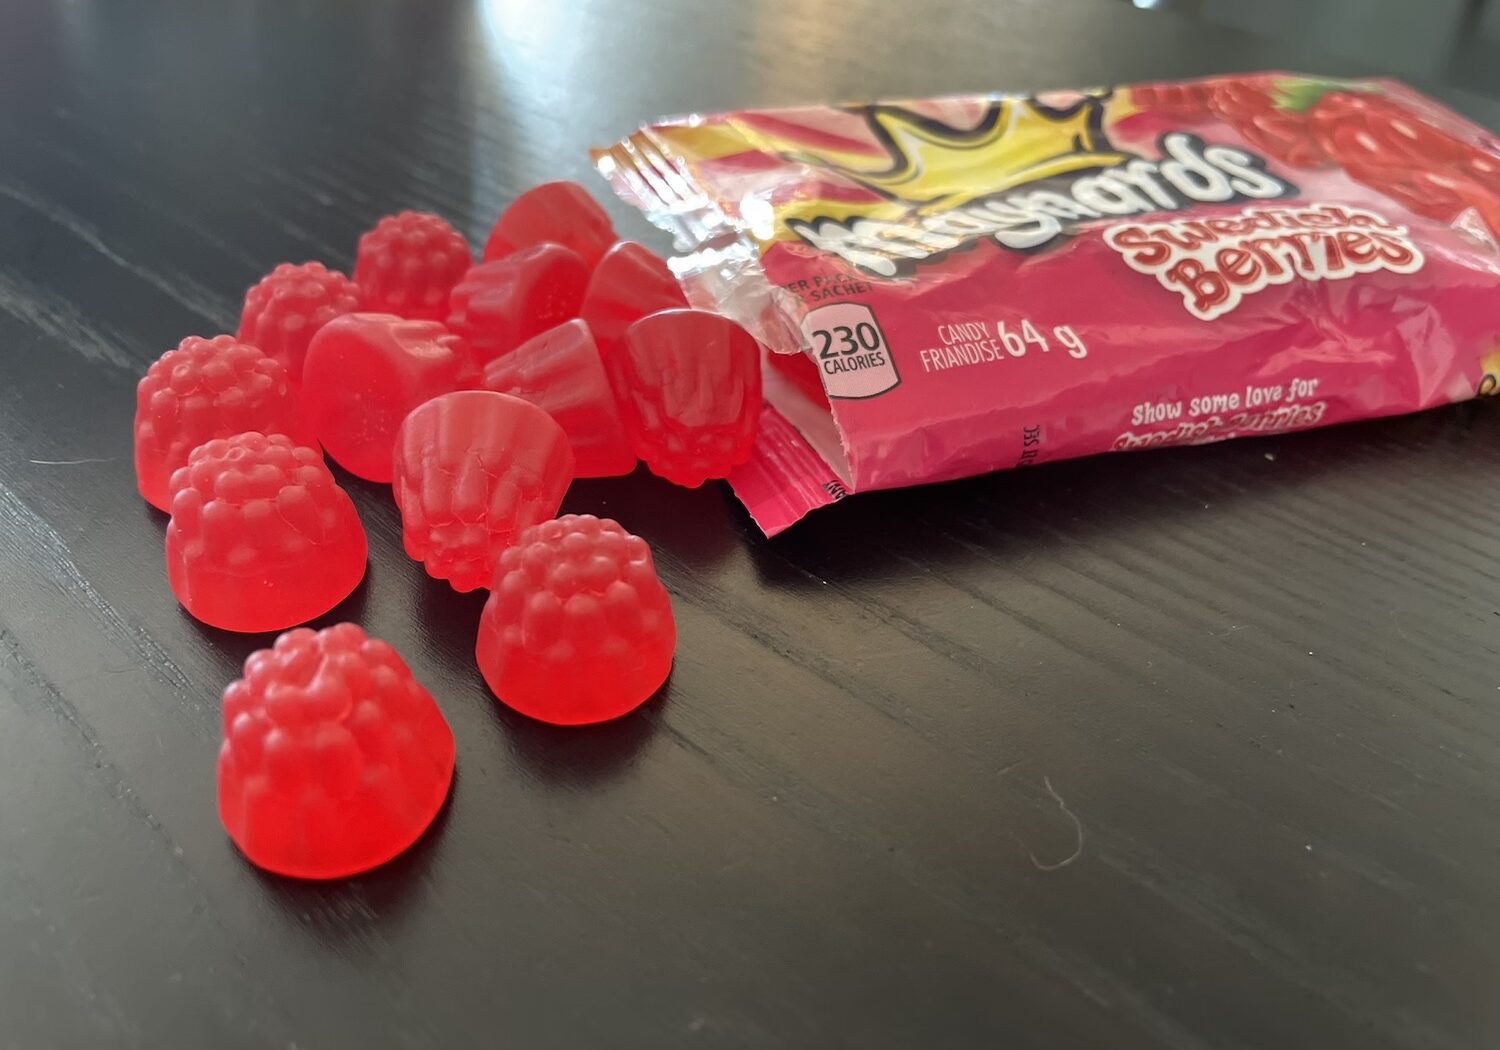 Maynard's Swedish Berries Gummy Candies coming out of the bag - February 2021 MunchPak